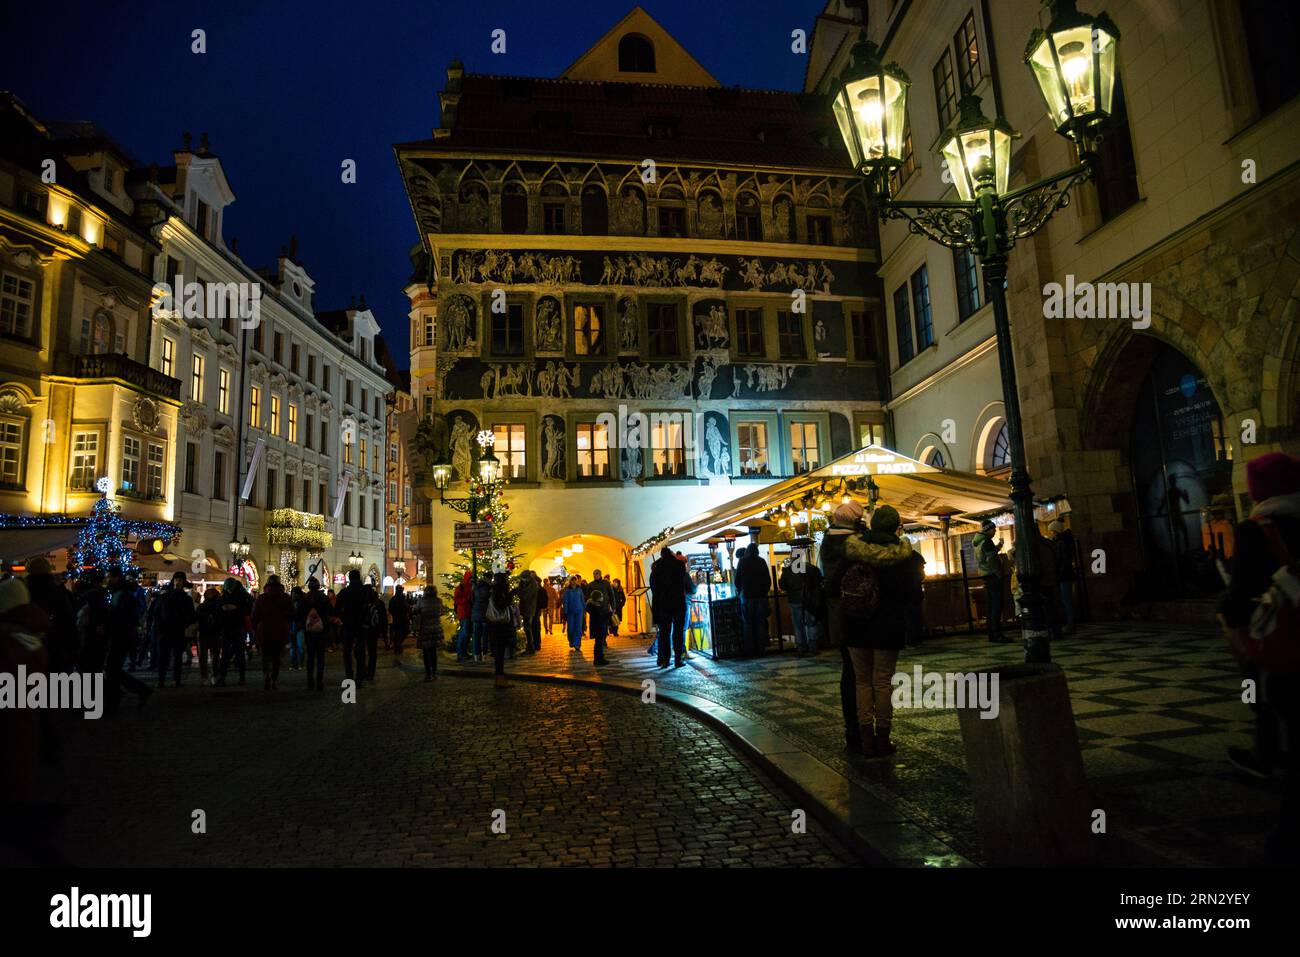 The House at the Minute in Old Town Square in Prague, Czech Republic. Stock Photo